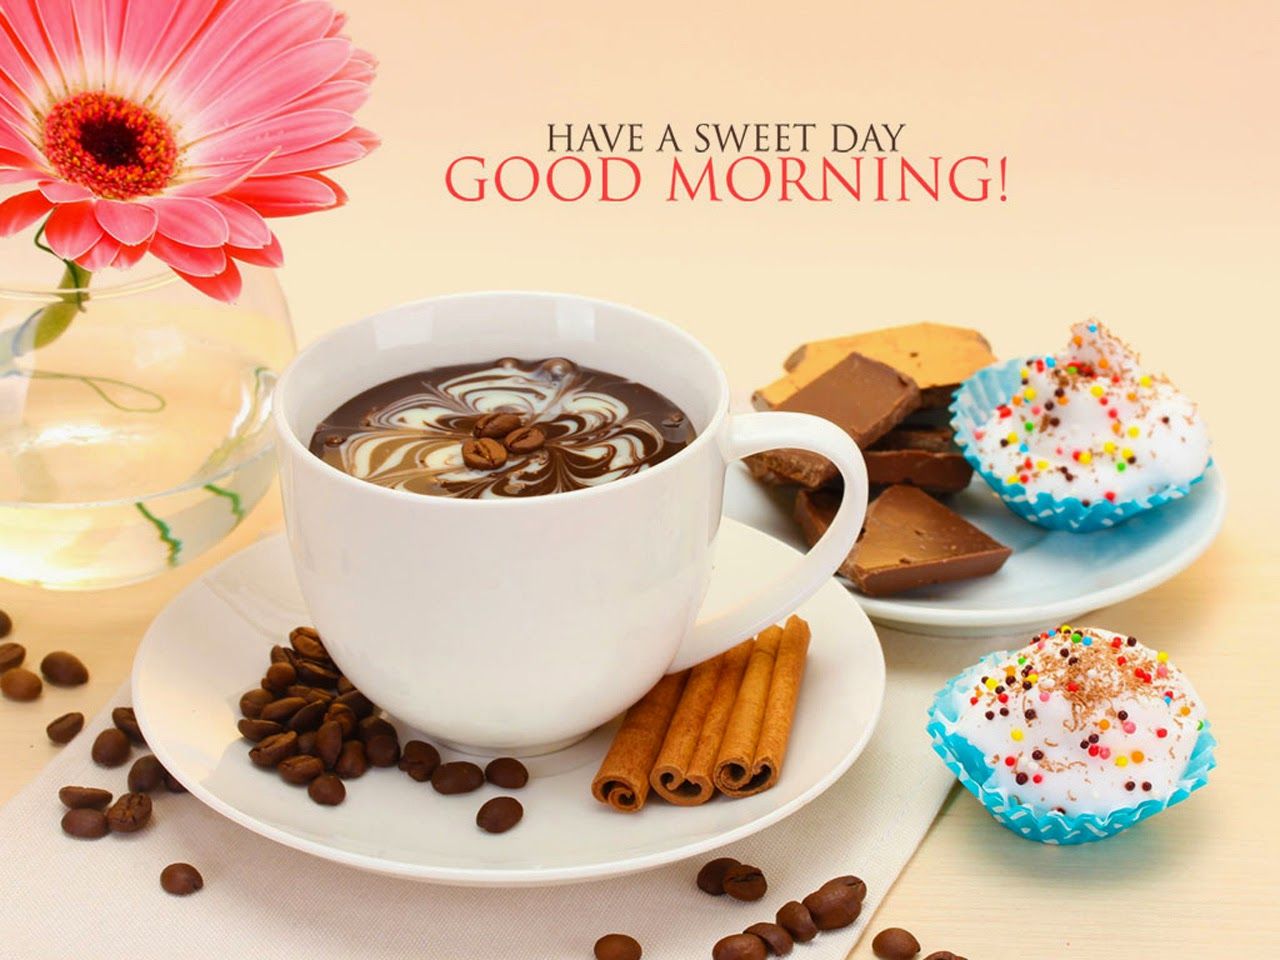 Good Morning SMS And Messages With Coffee Flower Wallpaper